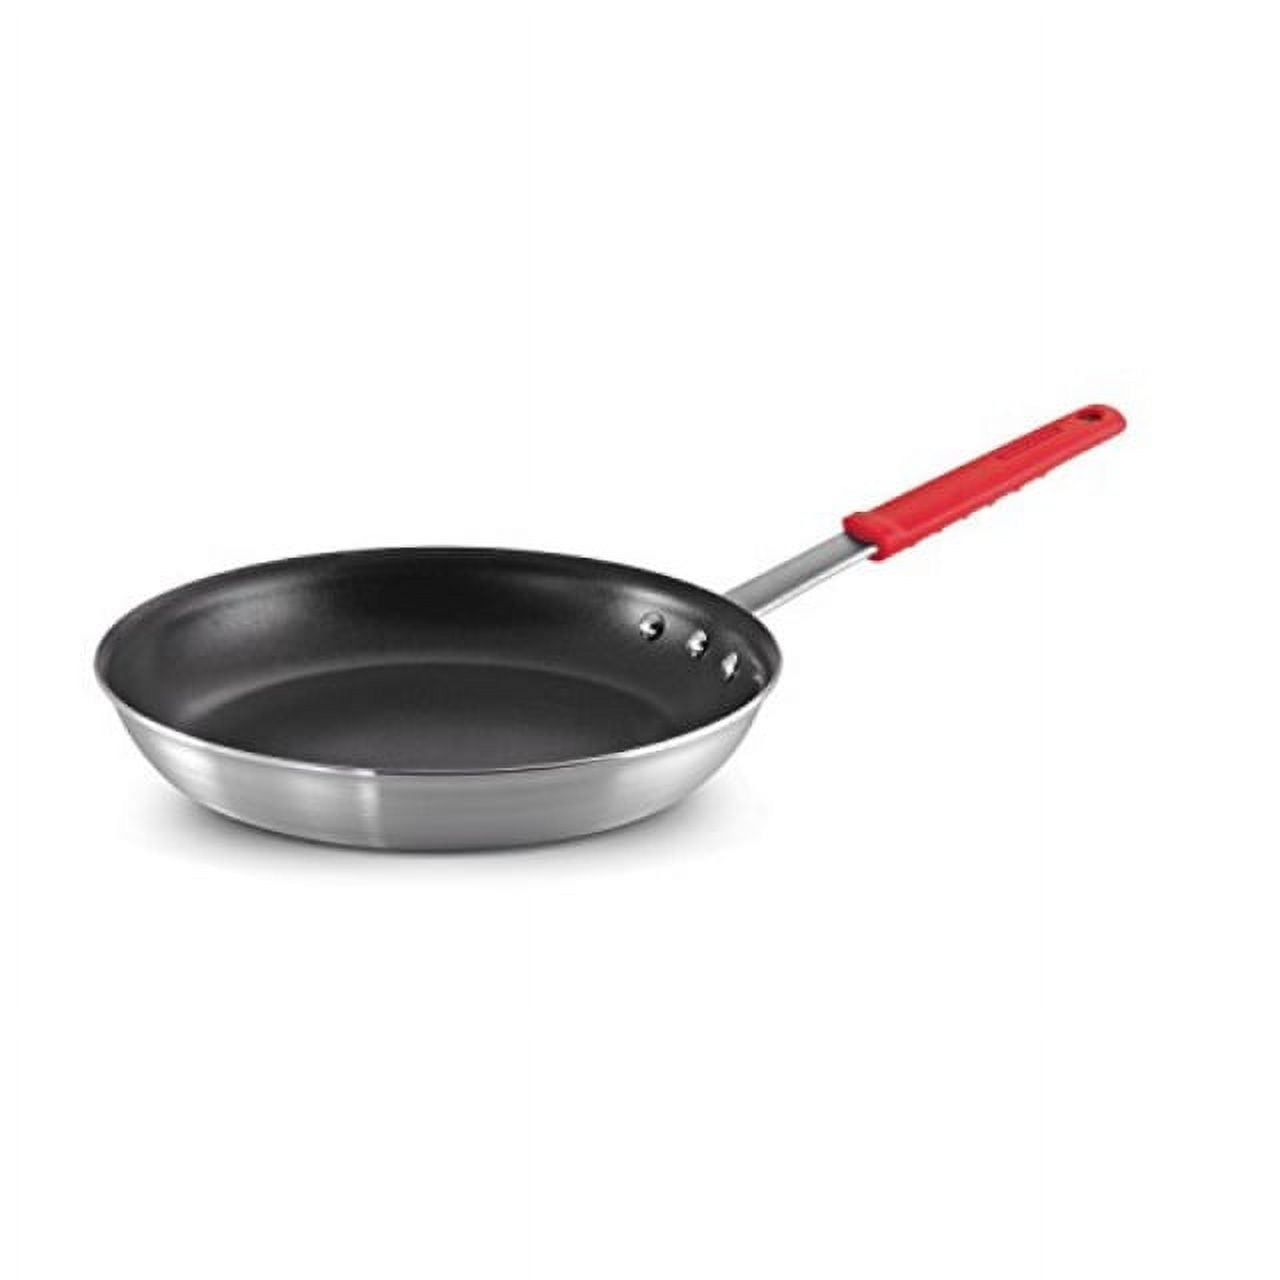 Tramontina Brava Frying Pan Stainless Steel Triple Bottom With Handle 24 Cm  2.1 L 62415240